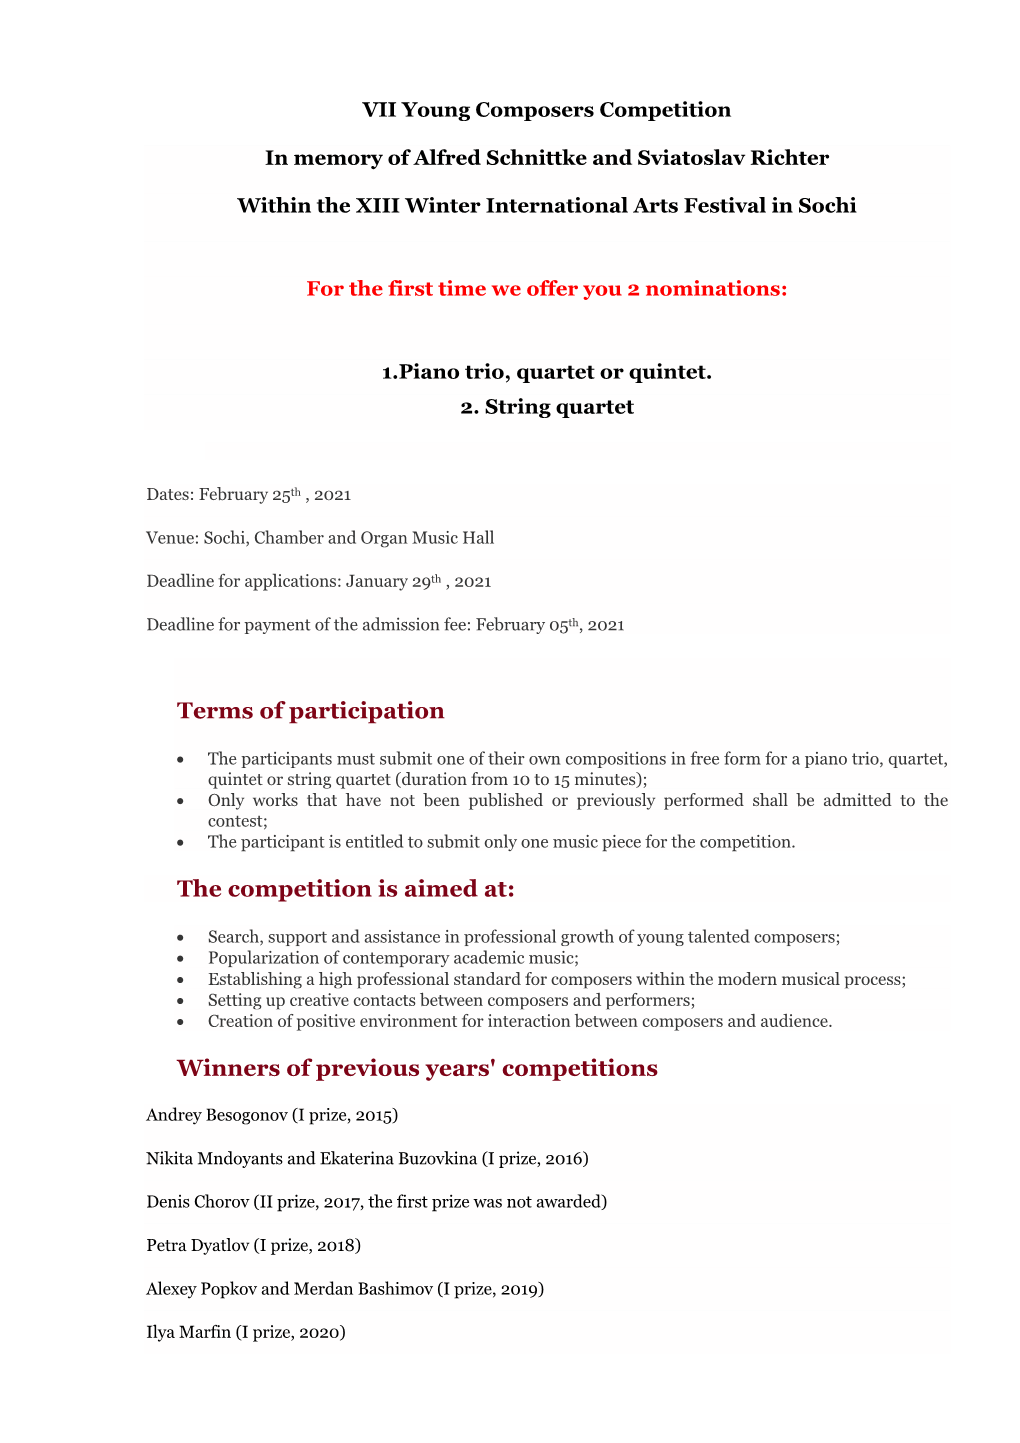 Terms of Participation the Competition Is Aimed At: Winners of Previous